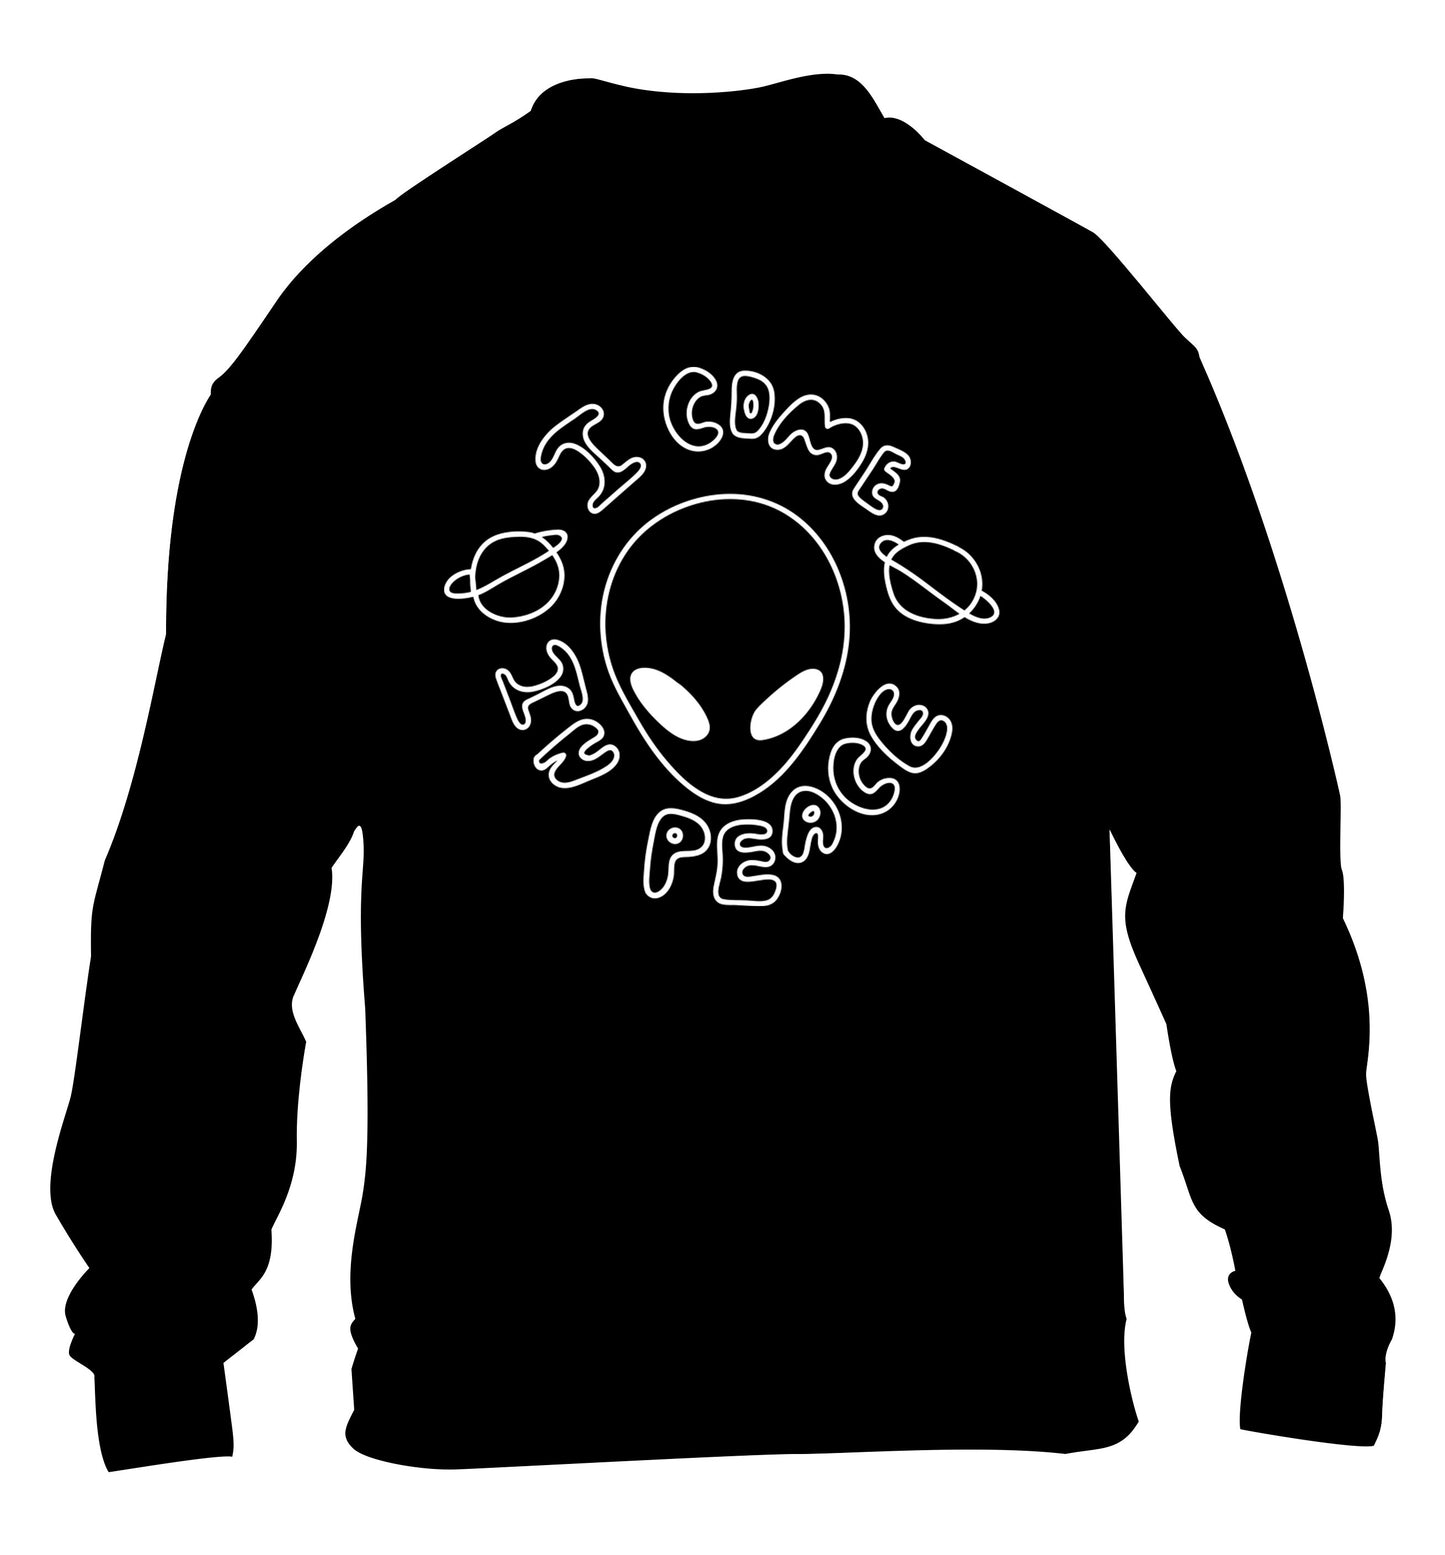 I come in peace children's black sweater 12-14 Years